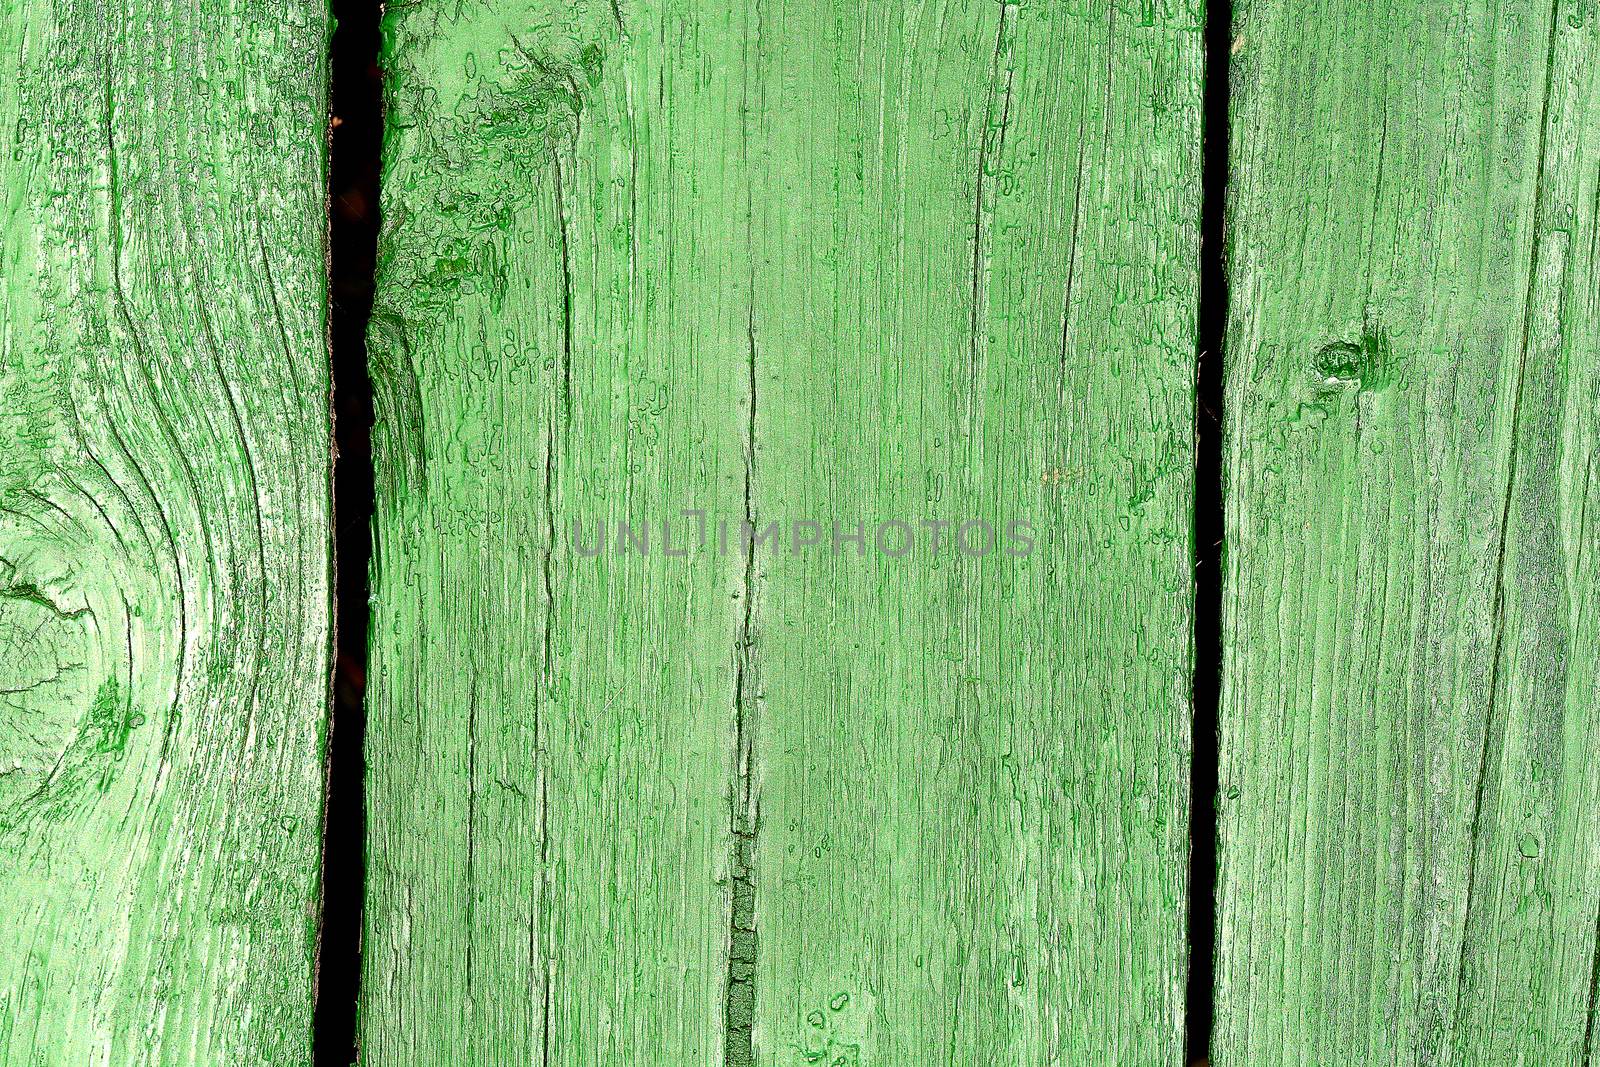 Natural green wood texture with an array of knots and ring lines.